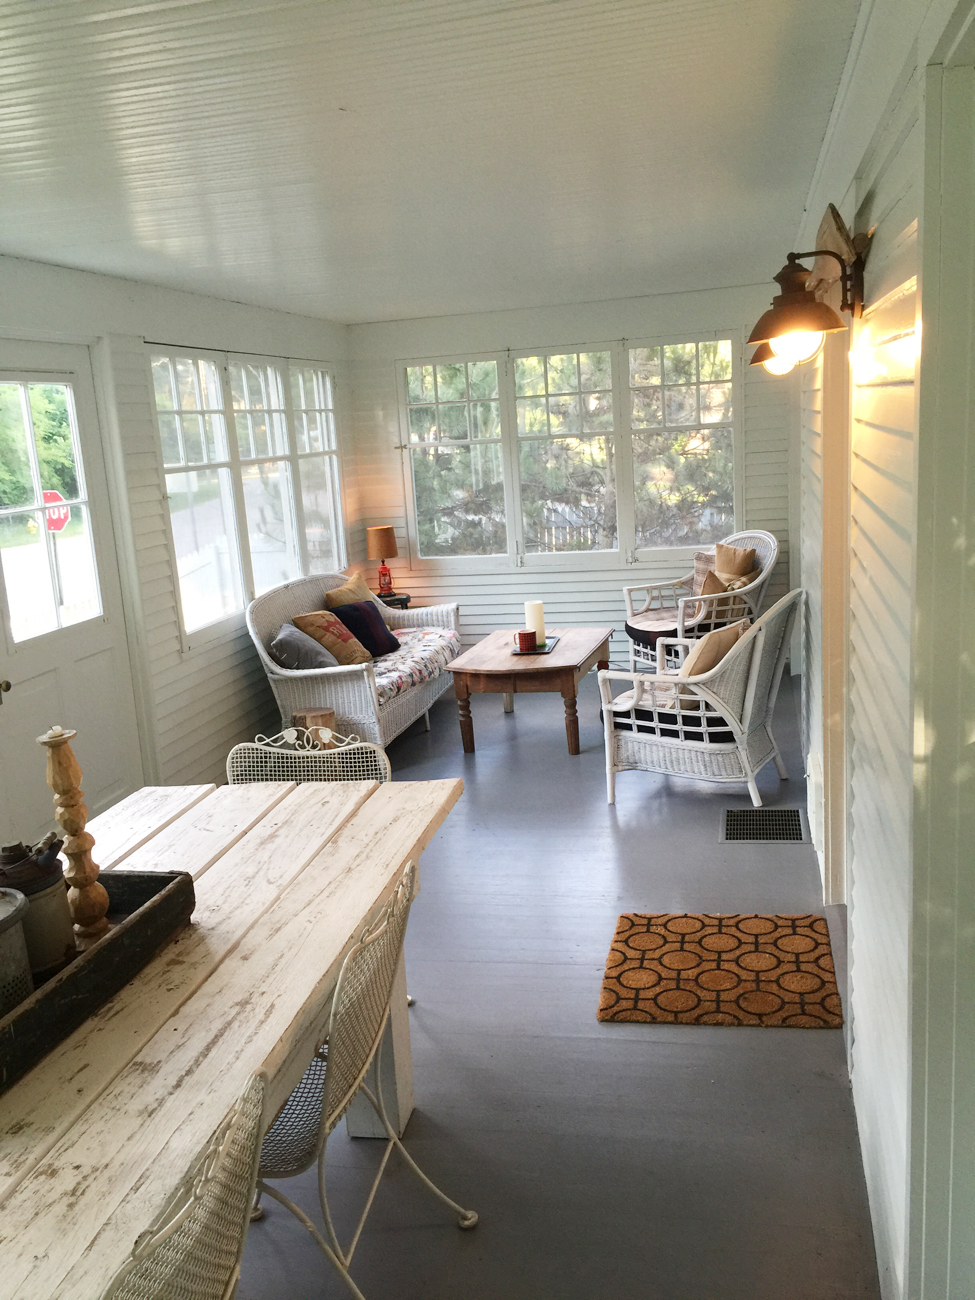 Sunroom with sitting area and dining table.